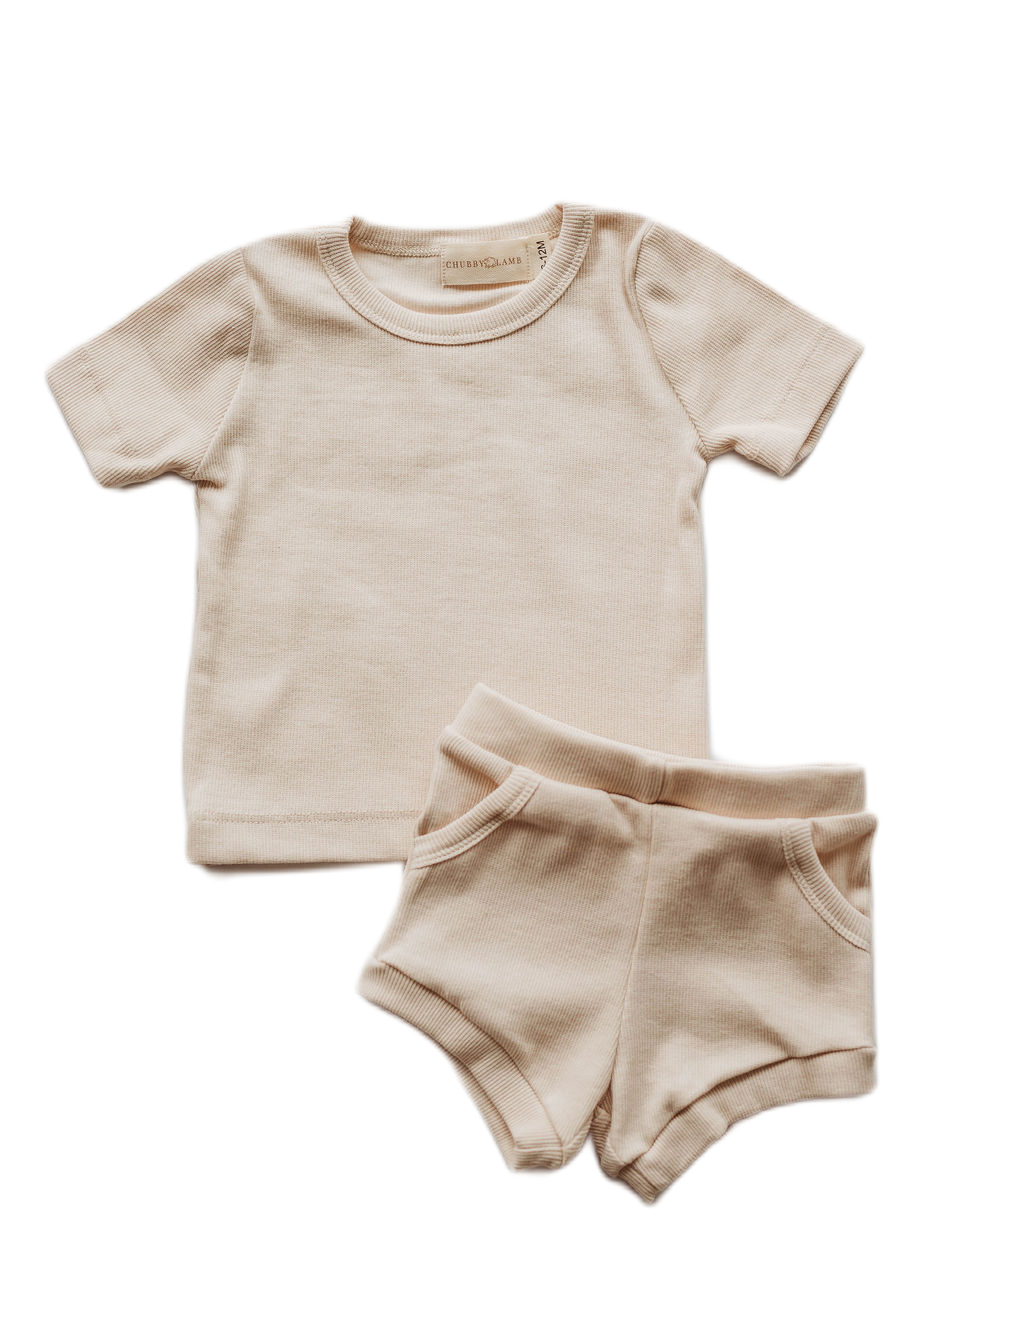 Organic cotton ribbed knit short set in "Oat"